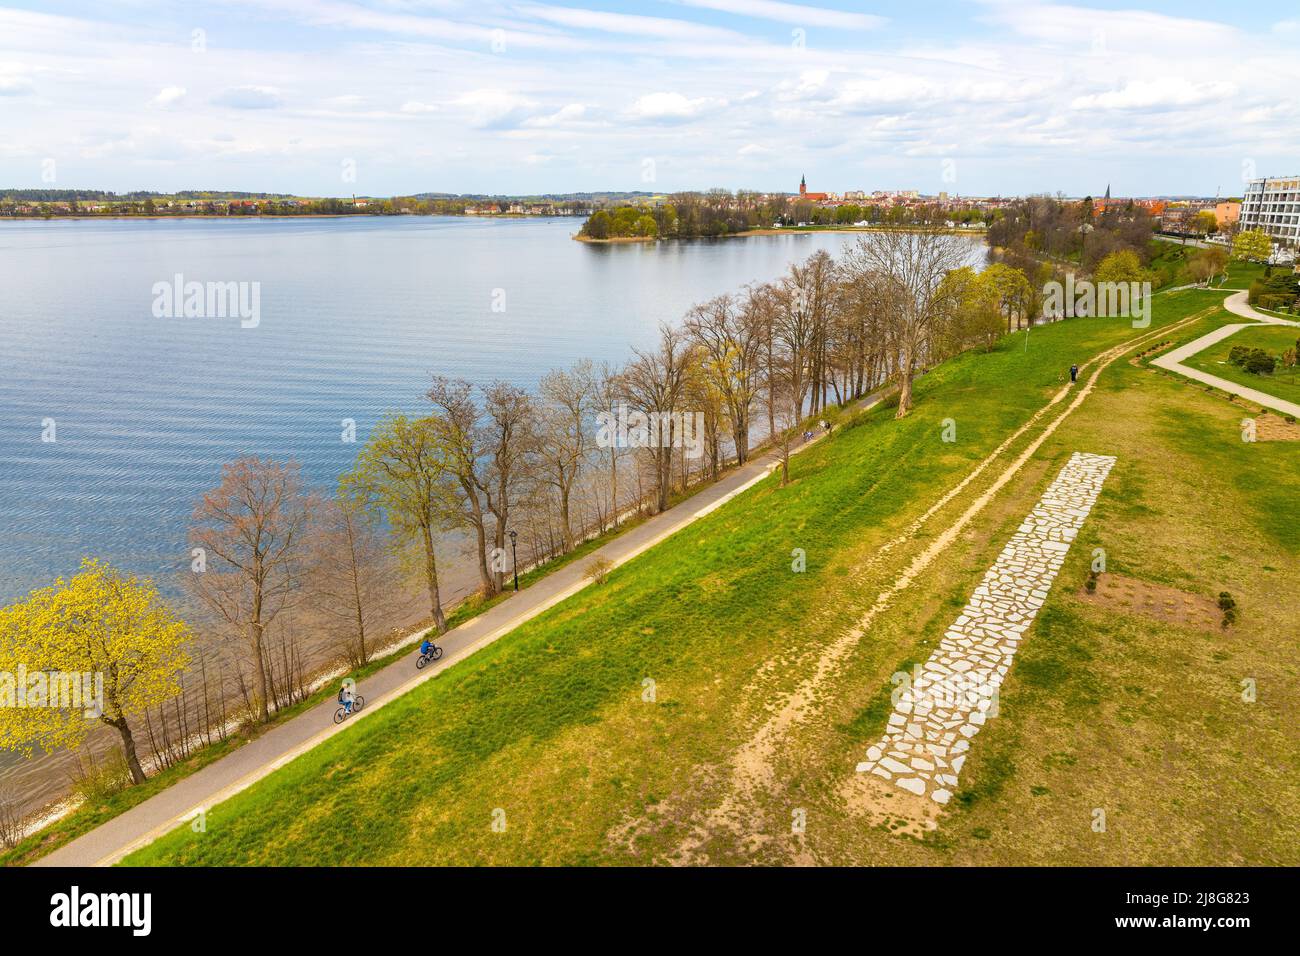 Elk, Poland - May 1, 2022: Panoramic aerial view of Jezioro Elckie lake strait with city beach peninsula and wooded shores in Elk town in Masuria Stock Photo